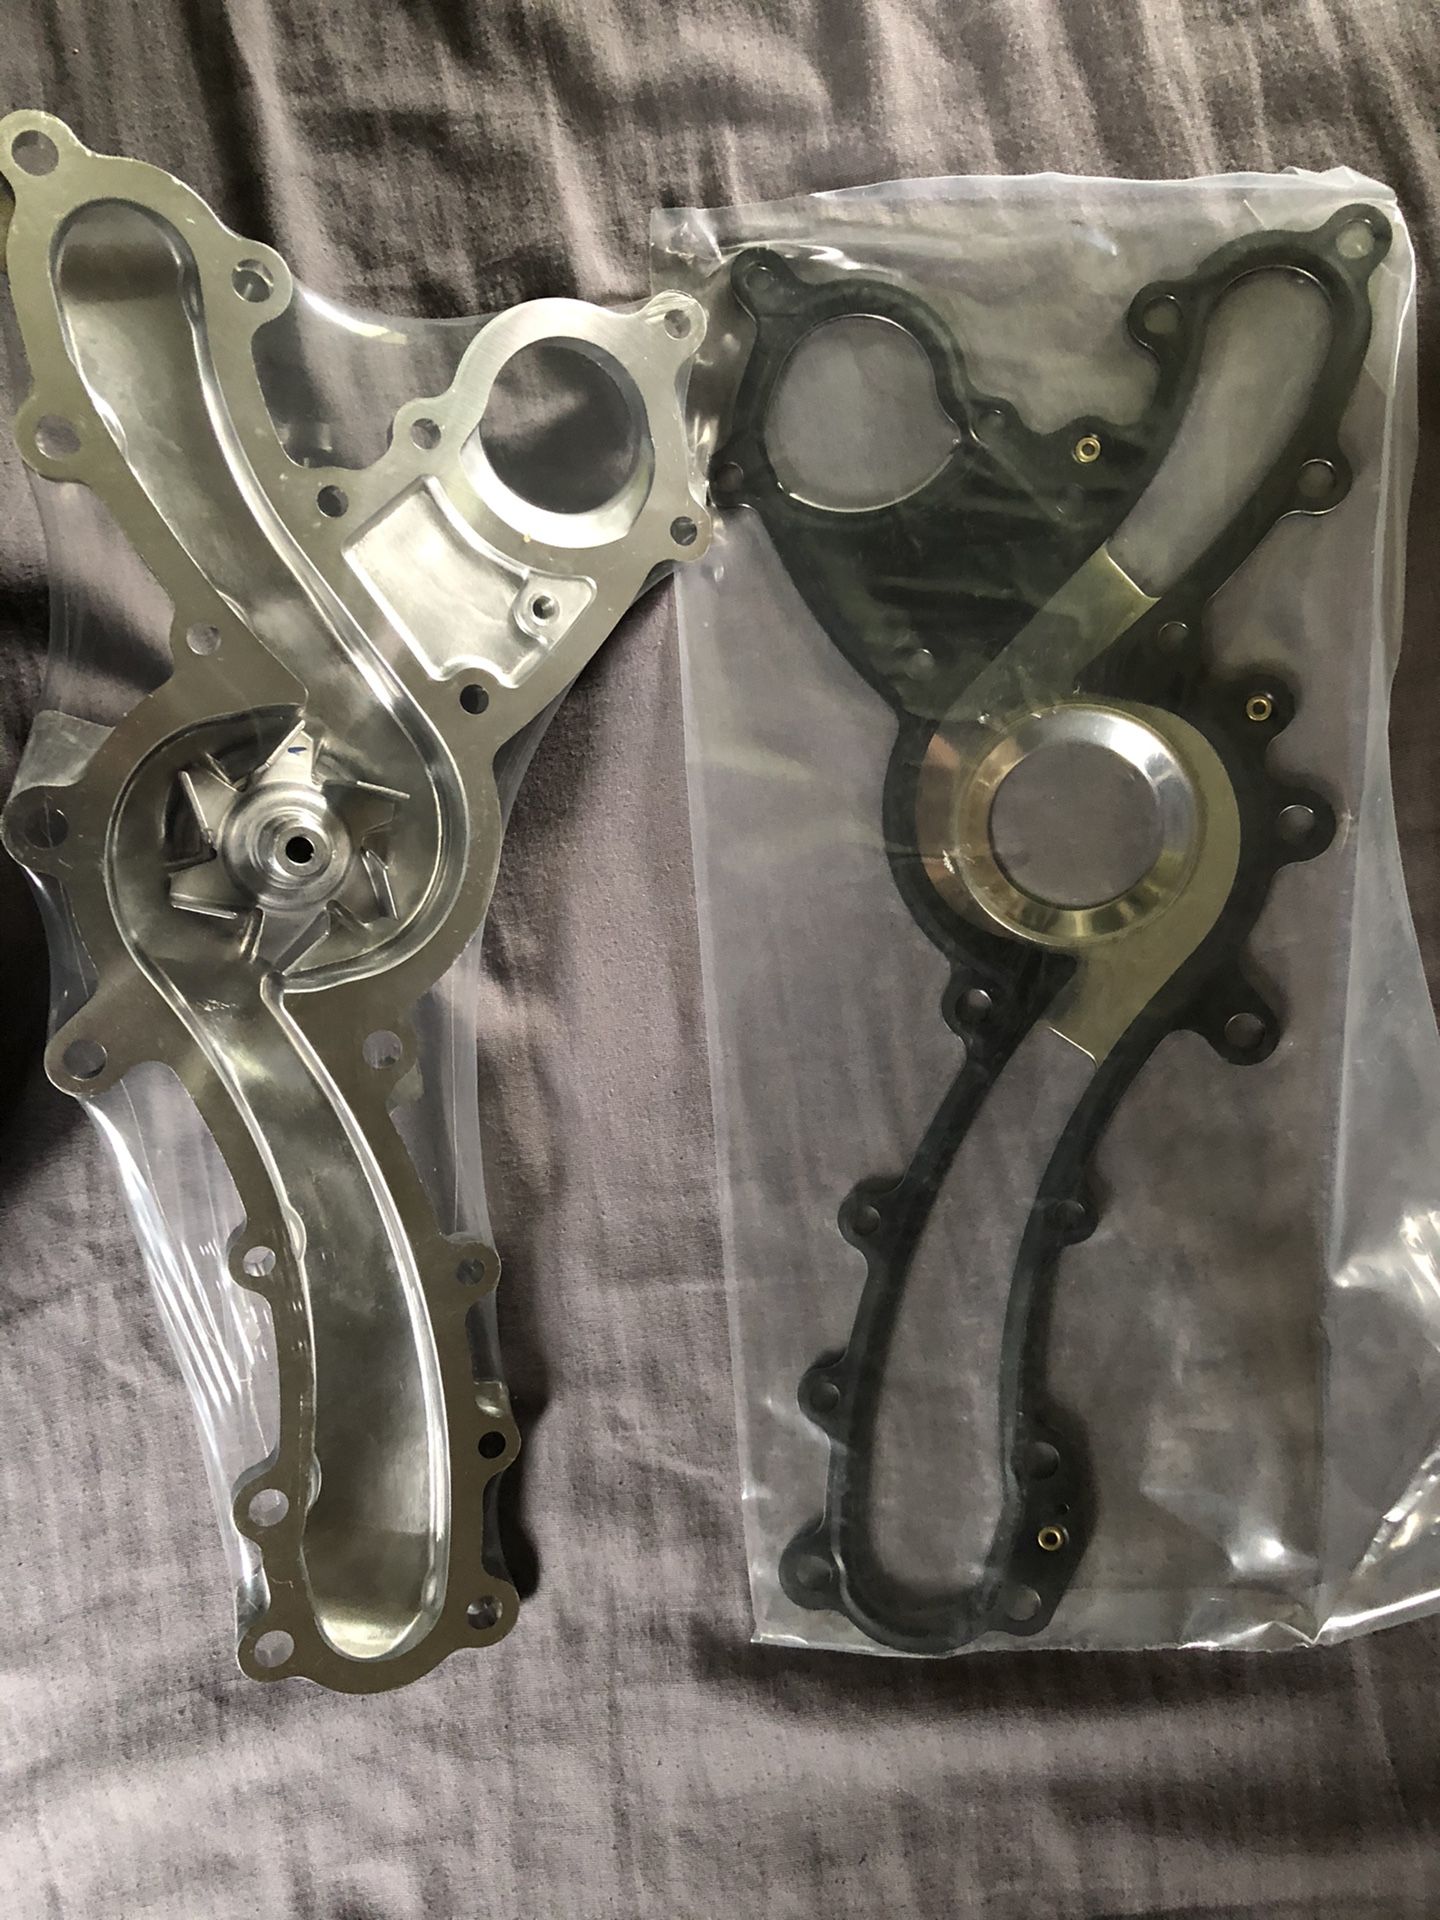 2008 Lexus GS 350 OEM Lexus / Toyota Water pump assembly & Gasket ONLY Genuine authentic auto parts Offers accepted OBO